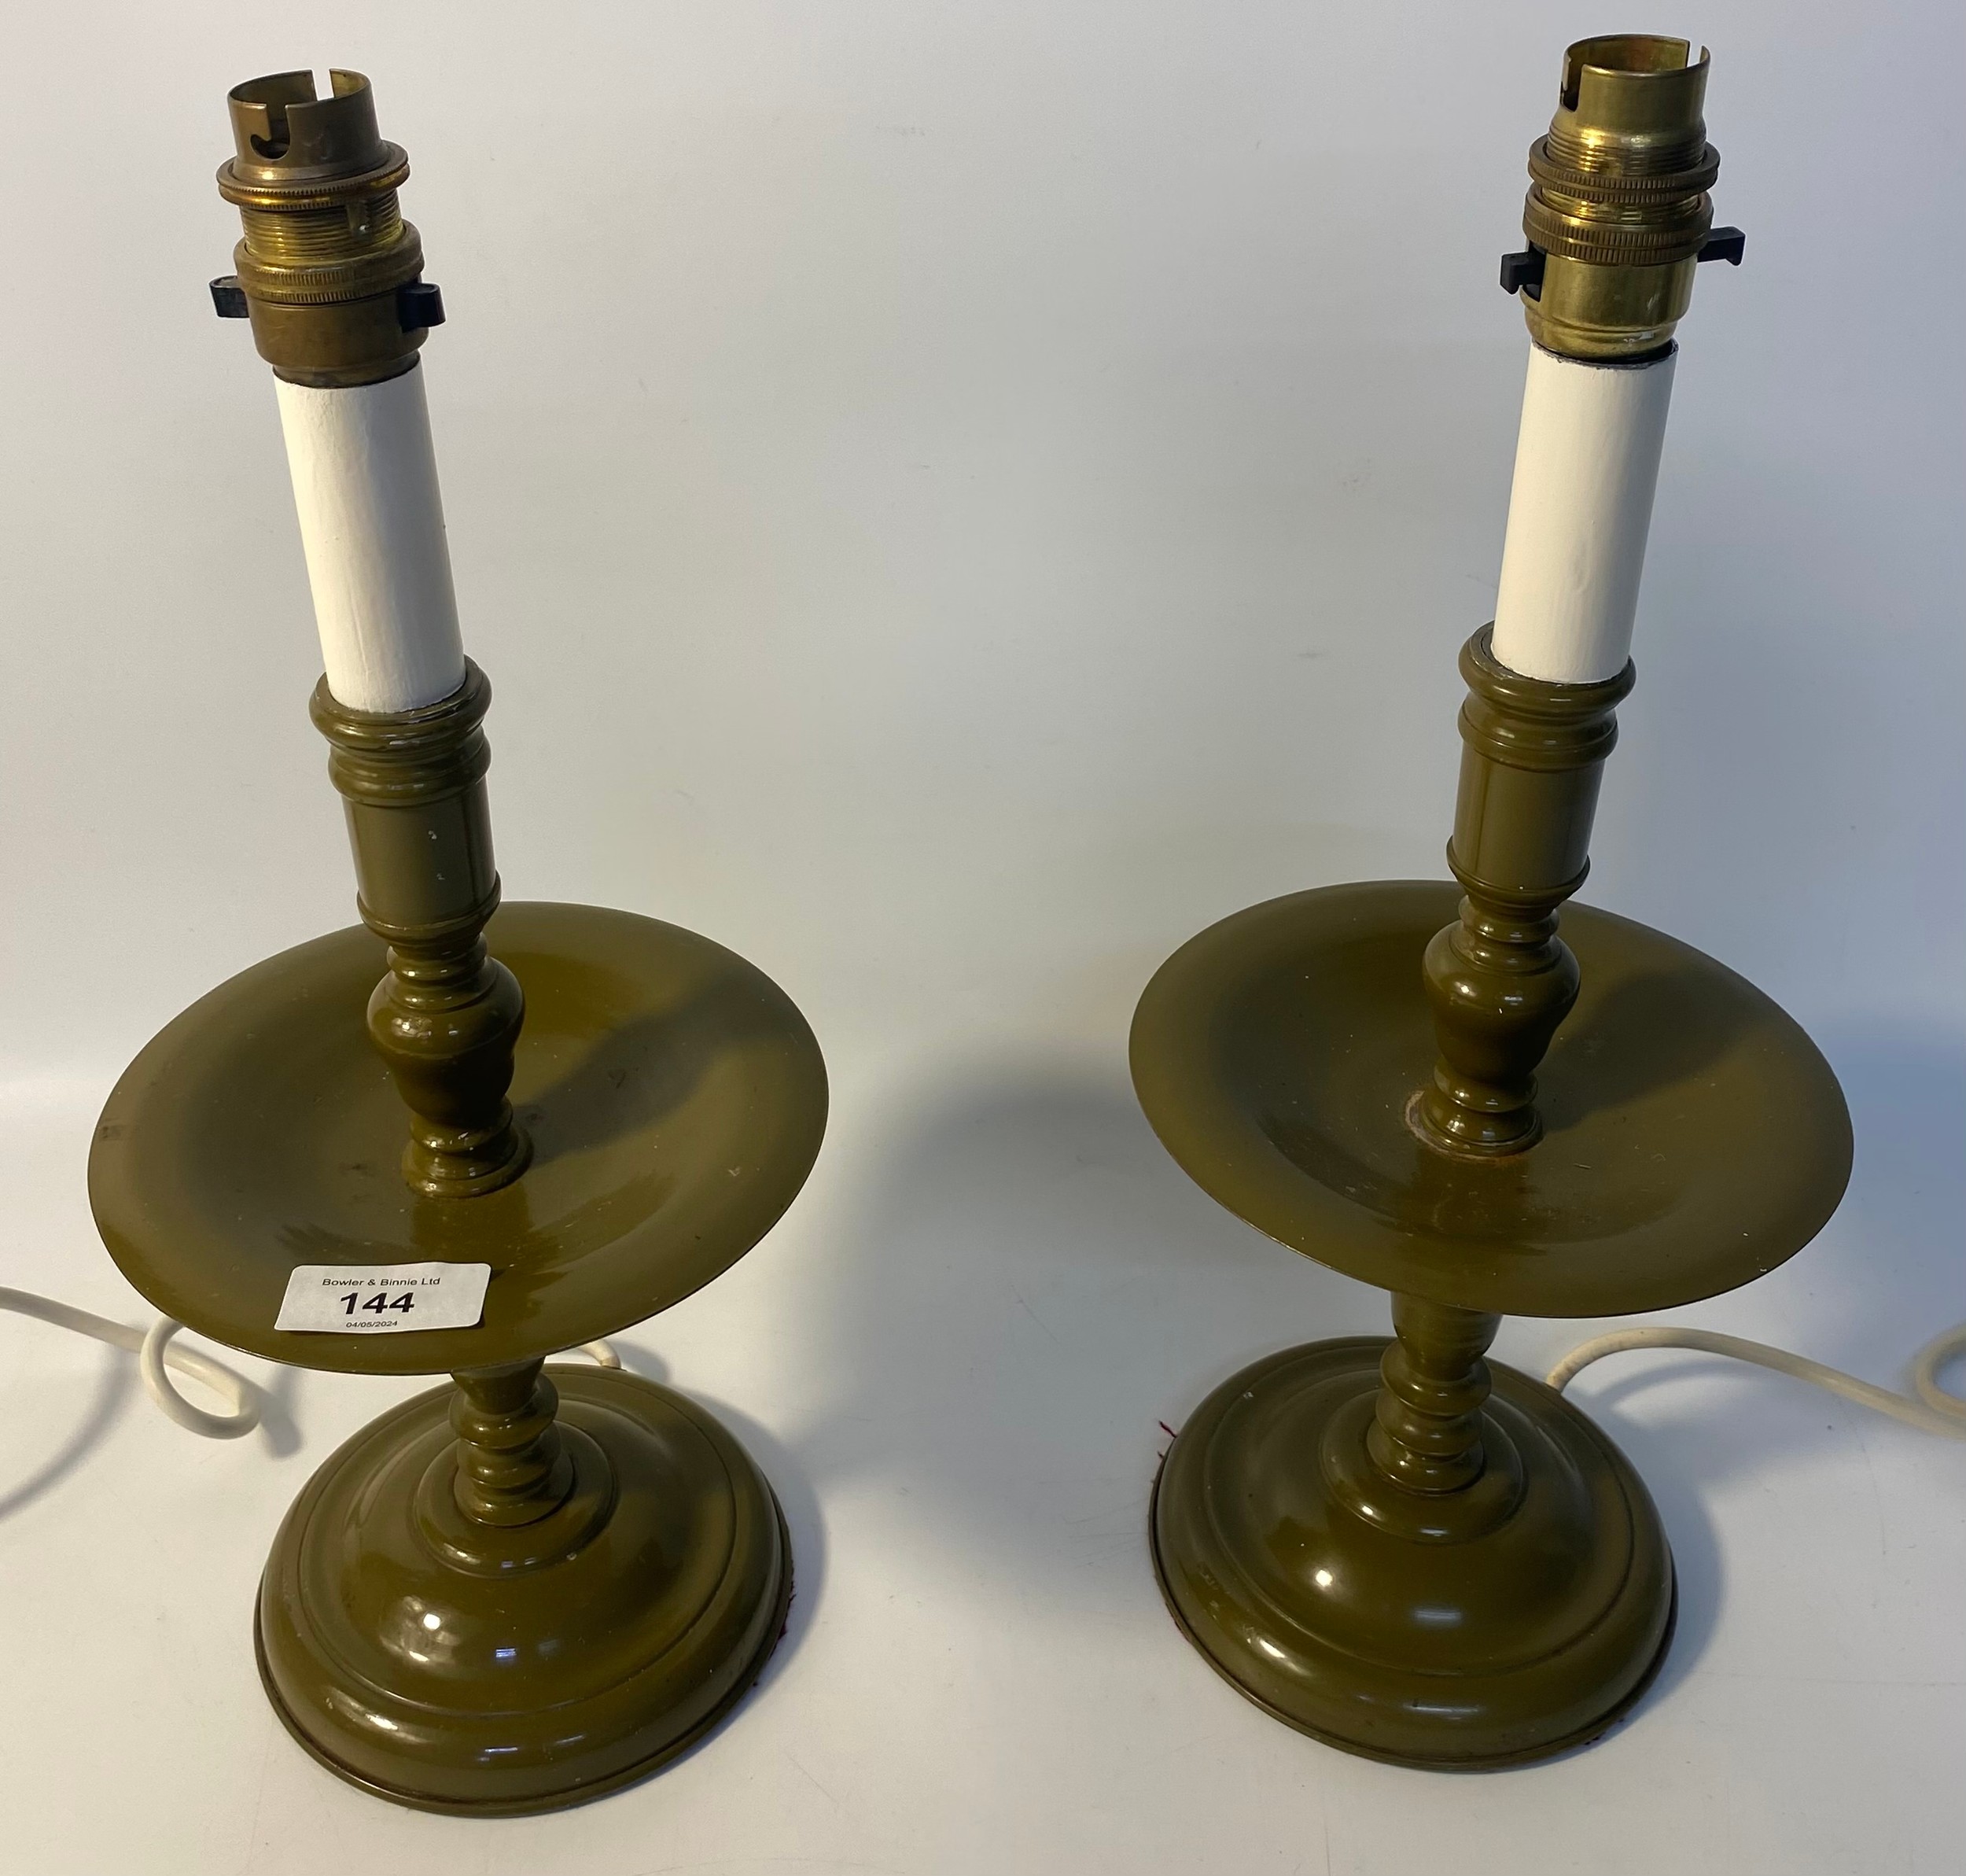 A Pair of 1930/40s enamelled industrial candle sticks [Converted to table lamps] - Image 2 of 5